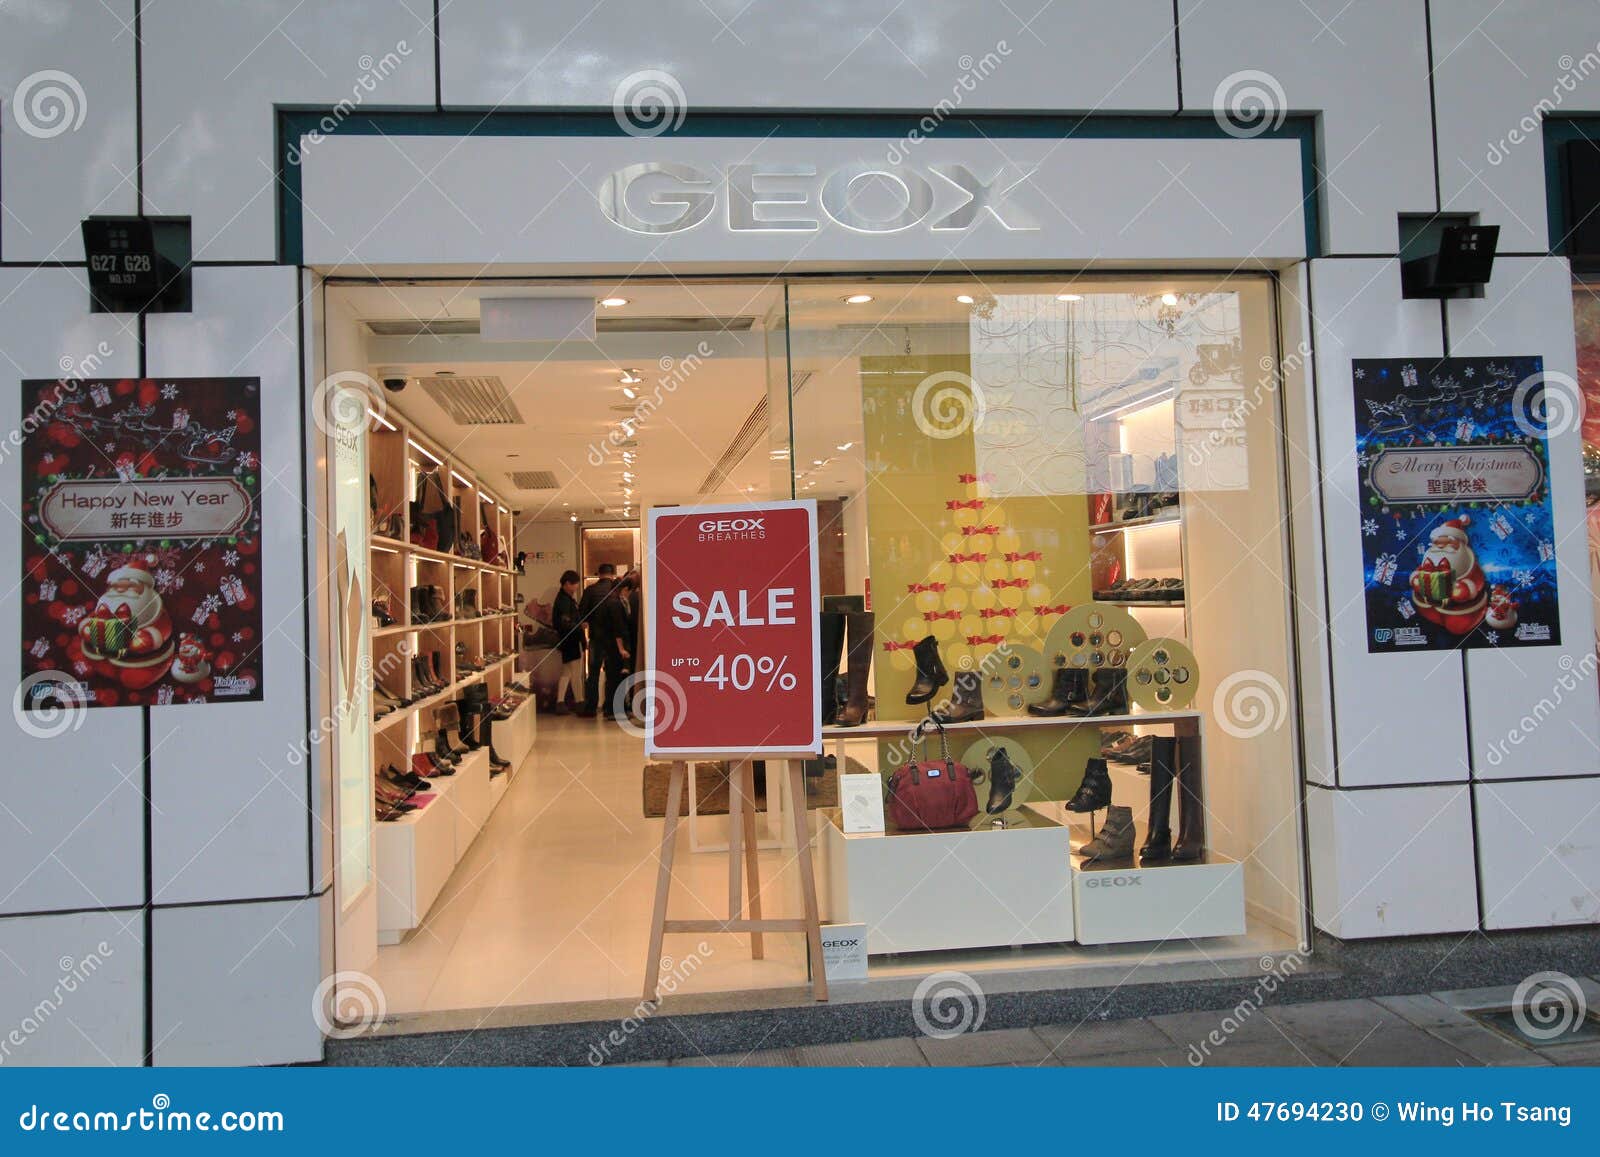 Geox Shop in Hong Editorial - Image of selling, located: 47694230